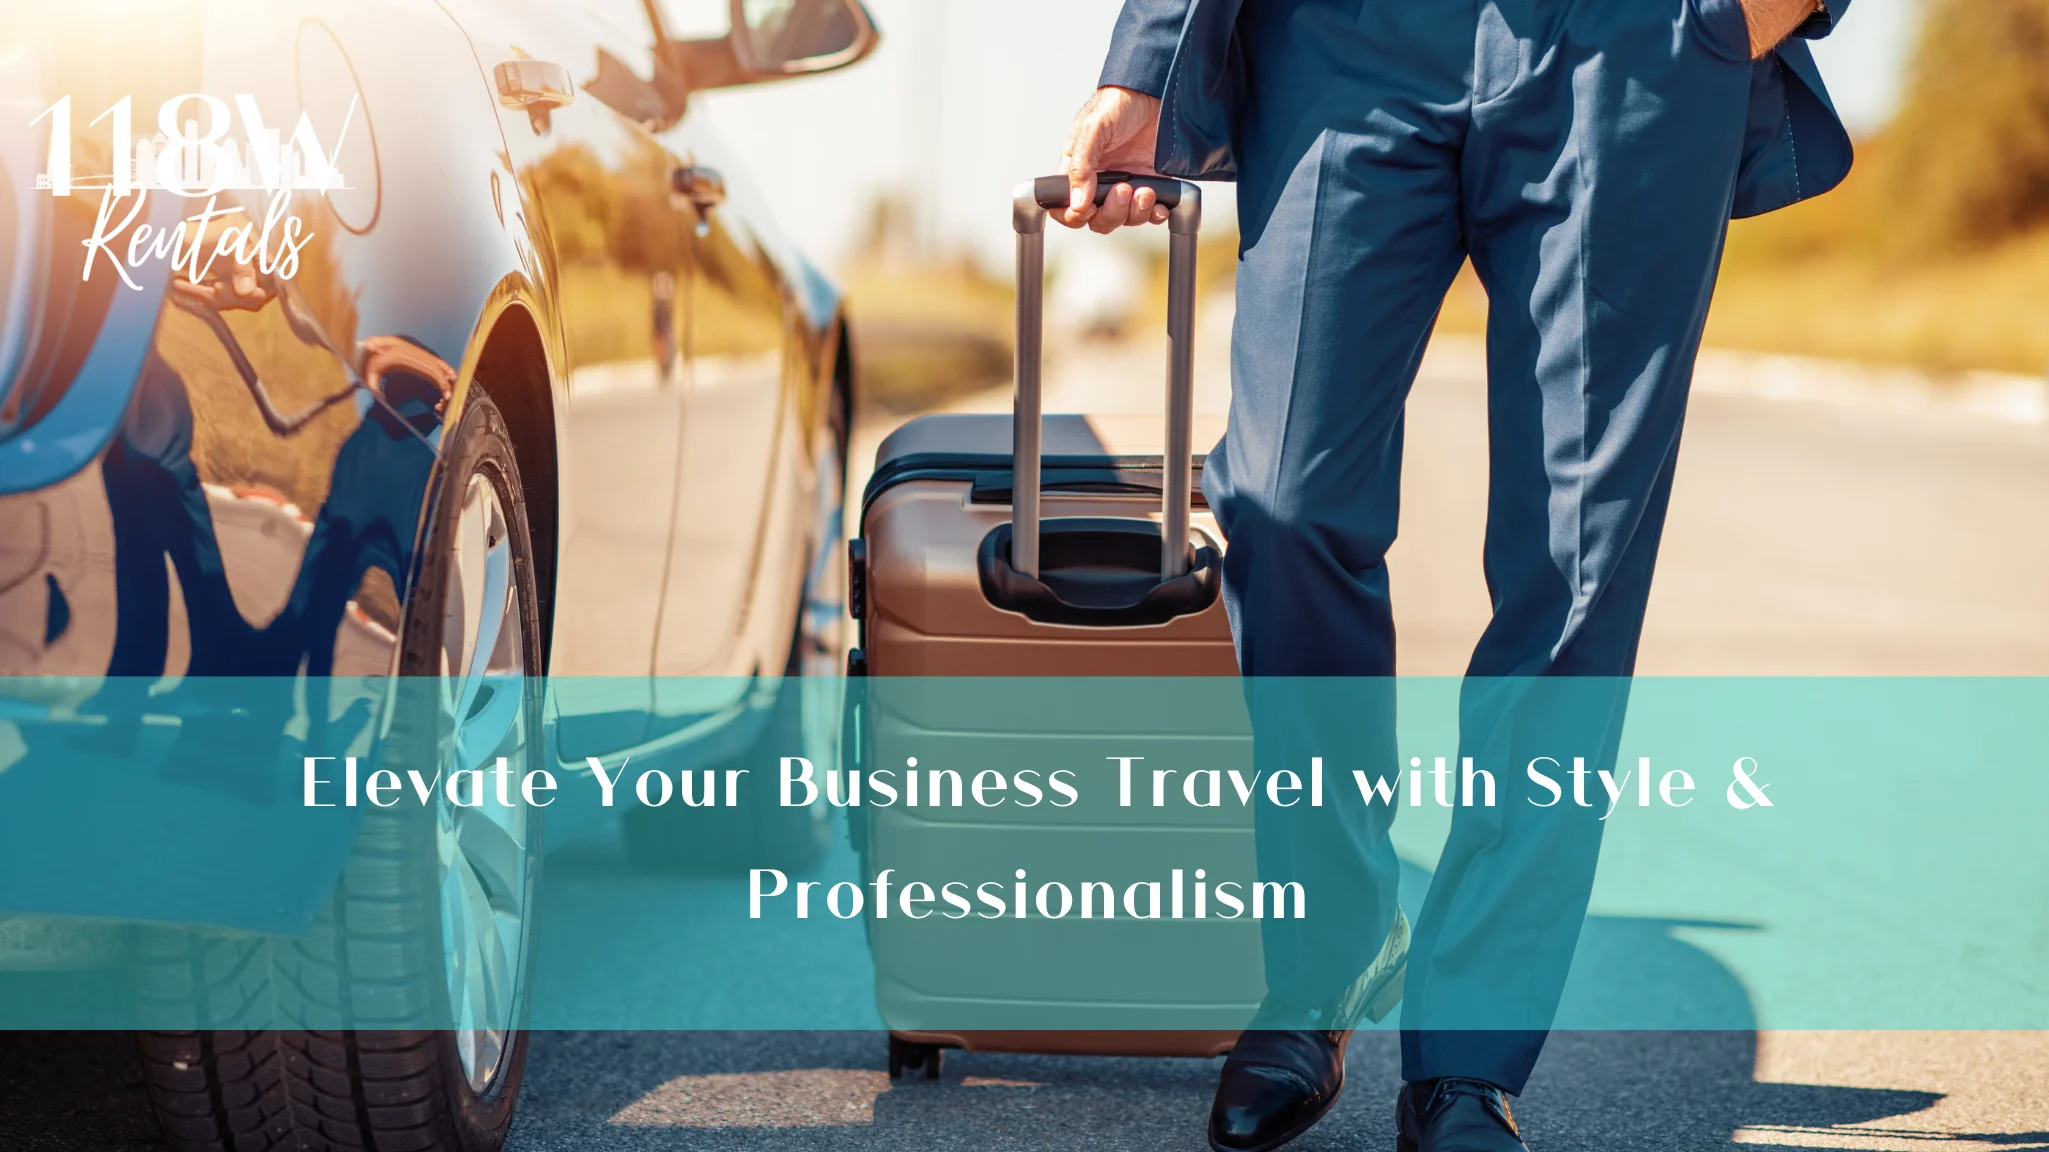 Elevate Your Business Travel with Style & Professionalism